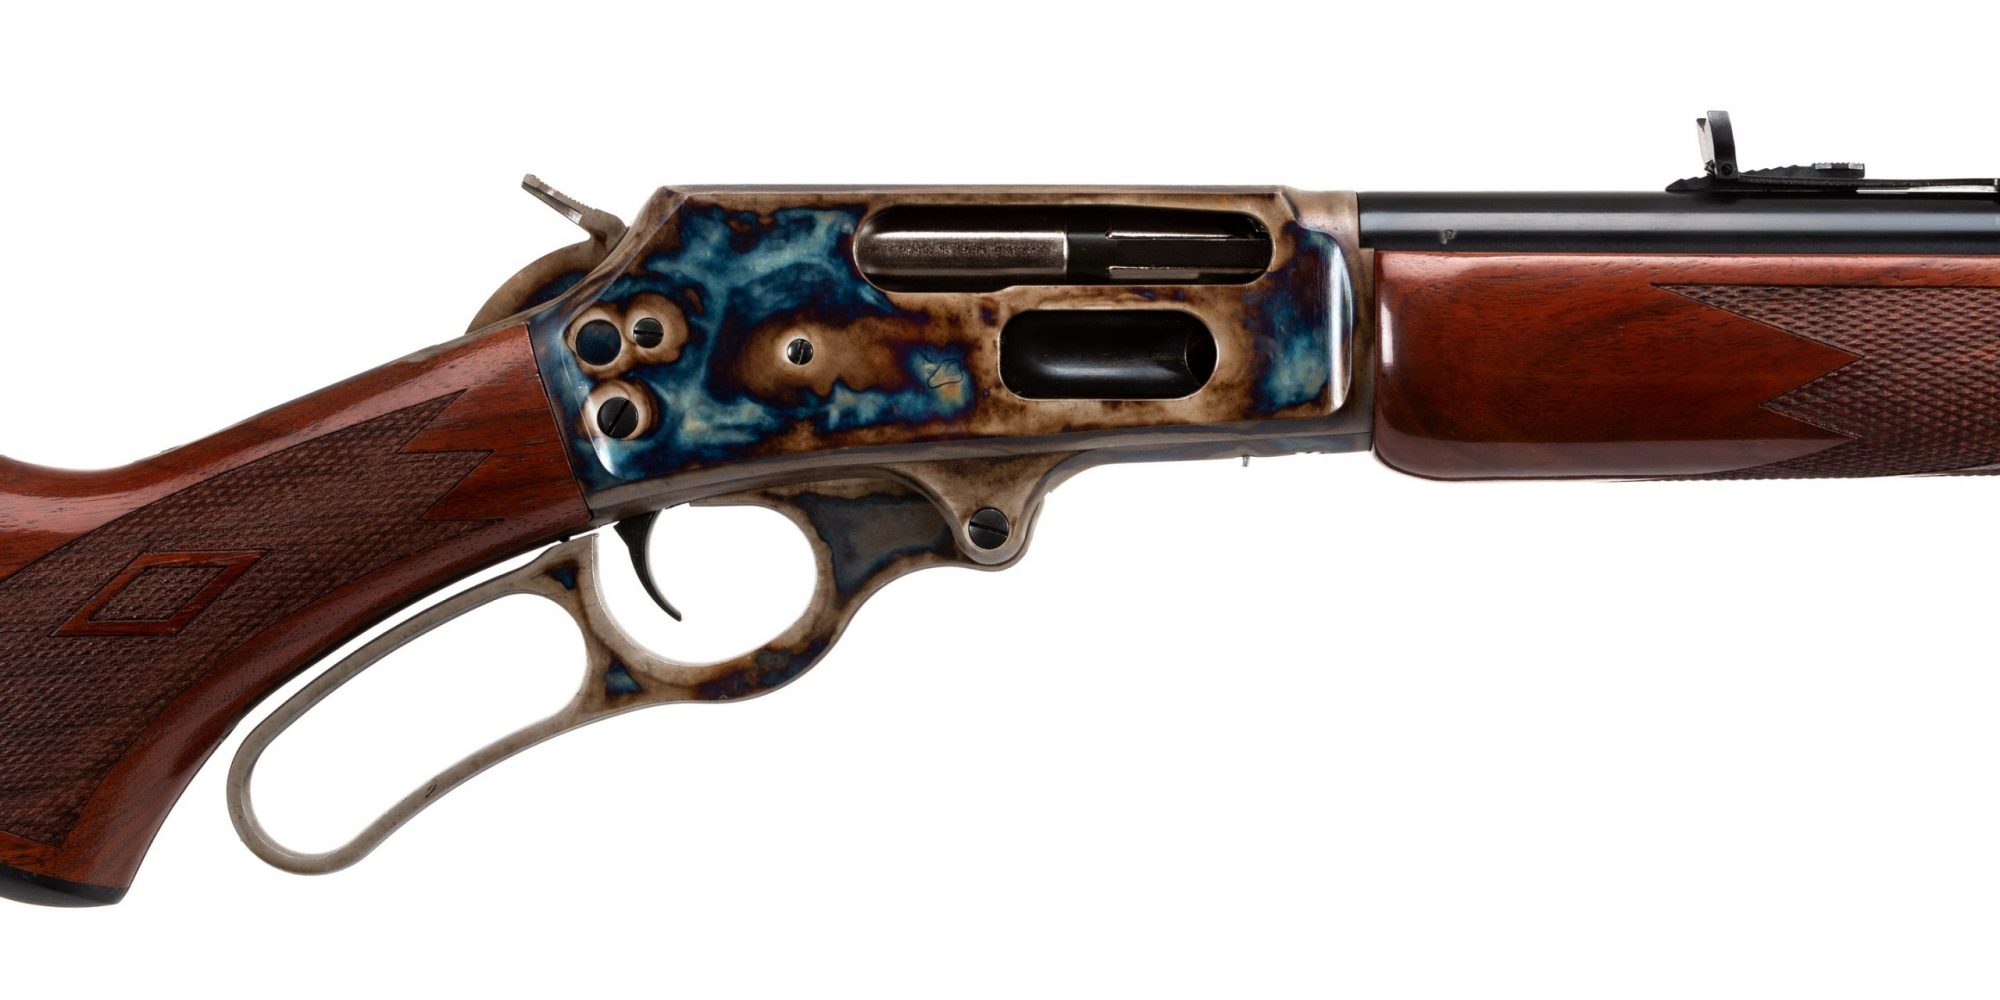 Photo of a Turnbull Finished Marlin 1895, featuring bone charcoal color case hardening